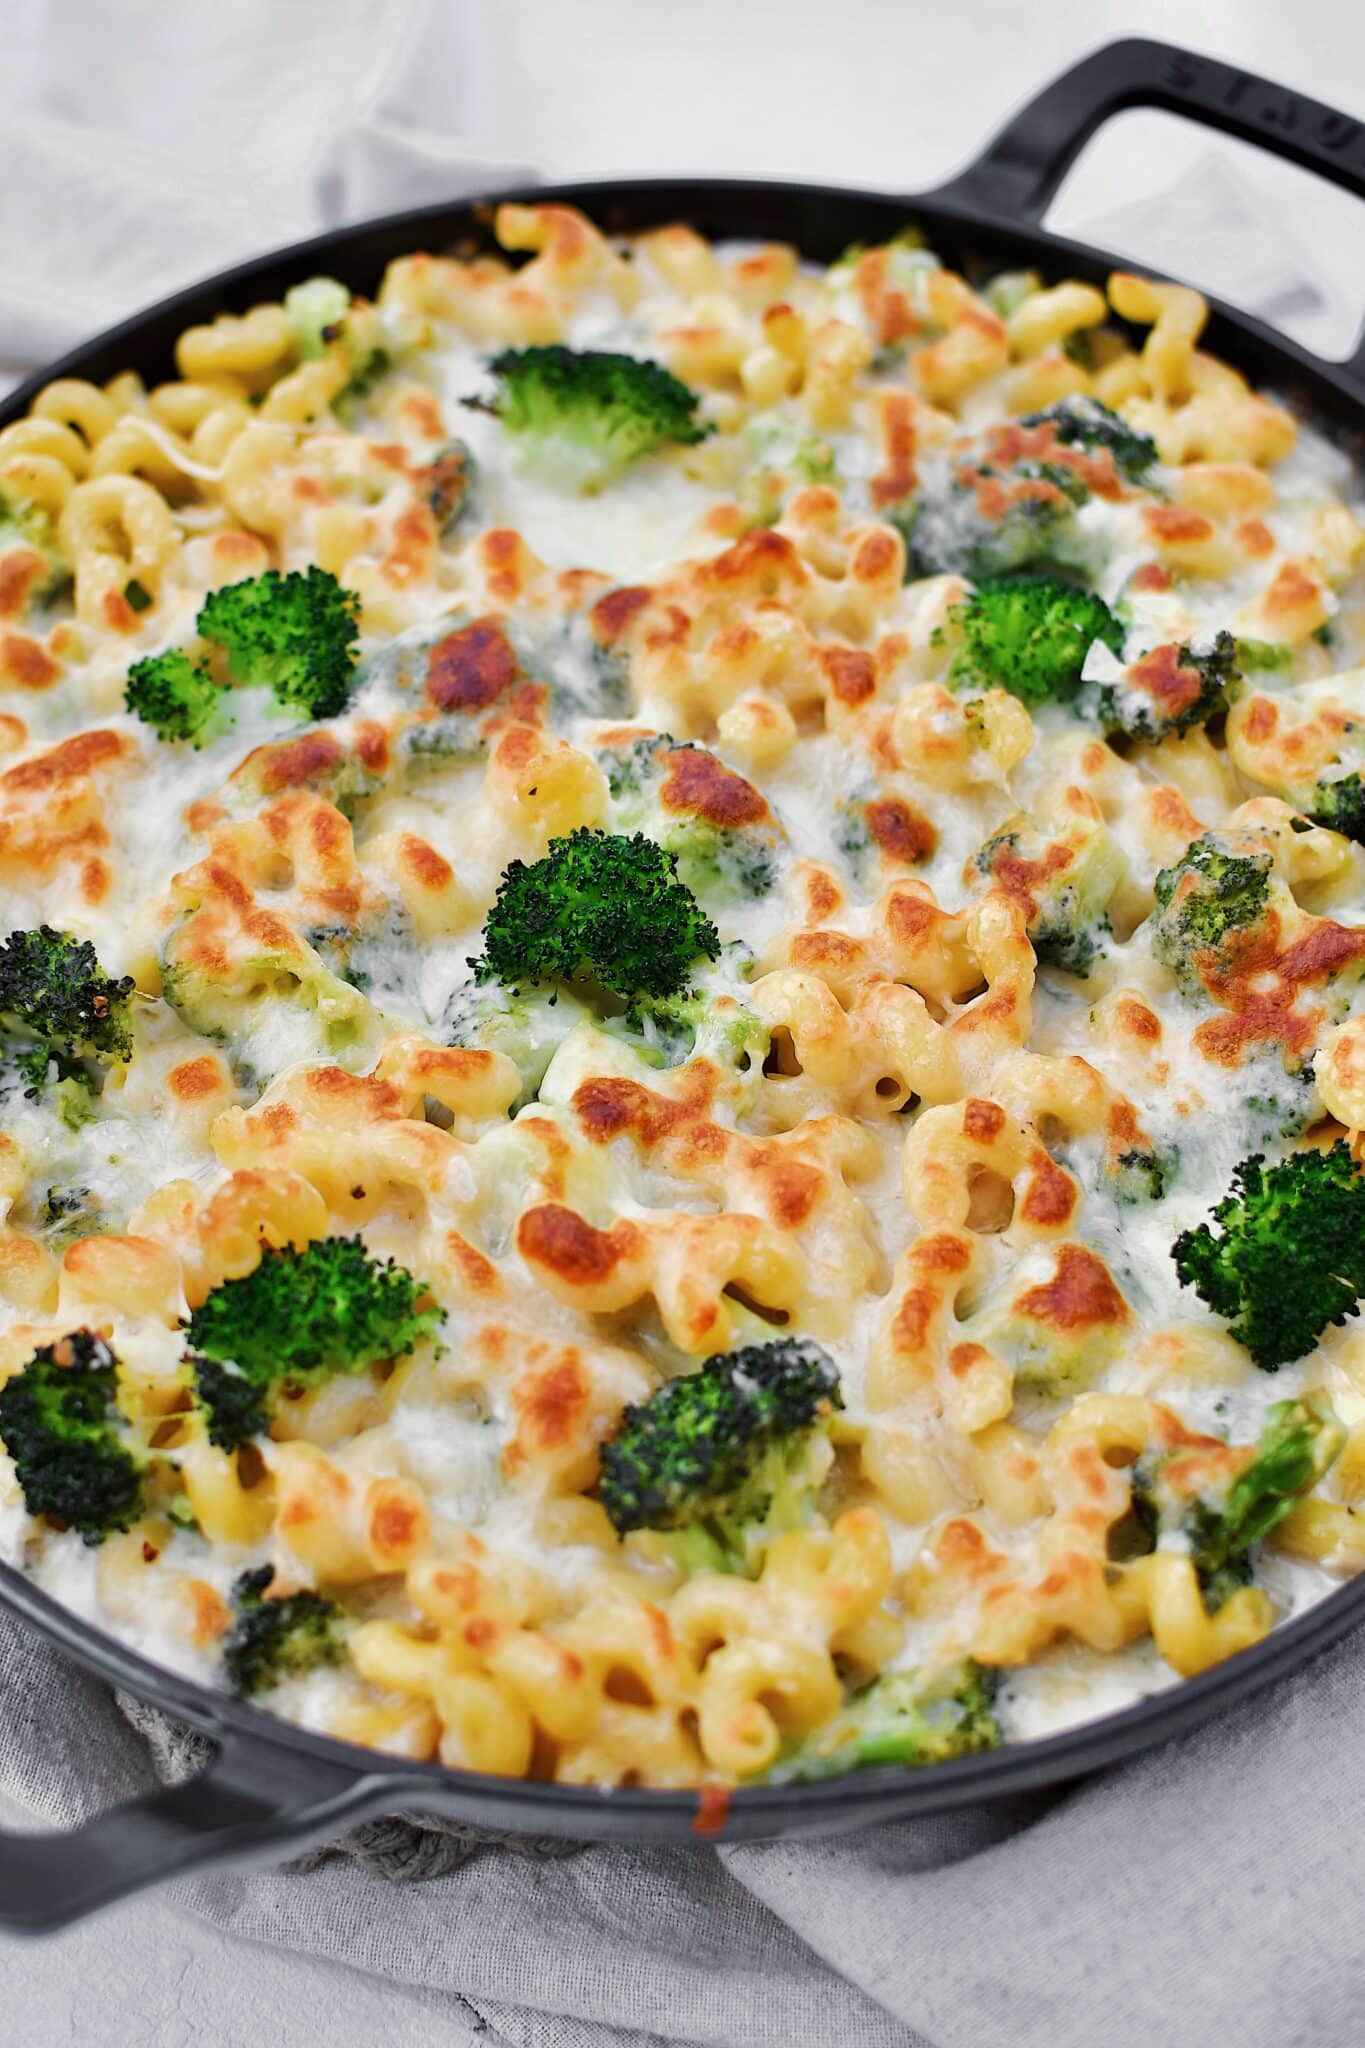 Alfredo Broccoli Pasta in the baking dish after baking to golden brown.